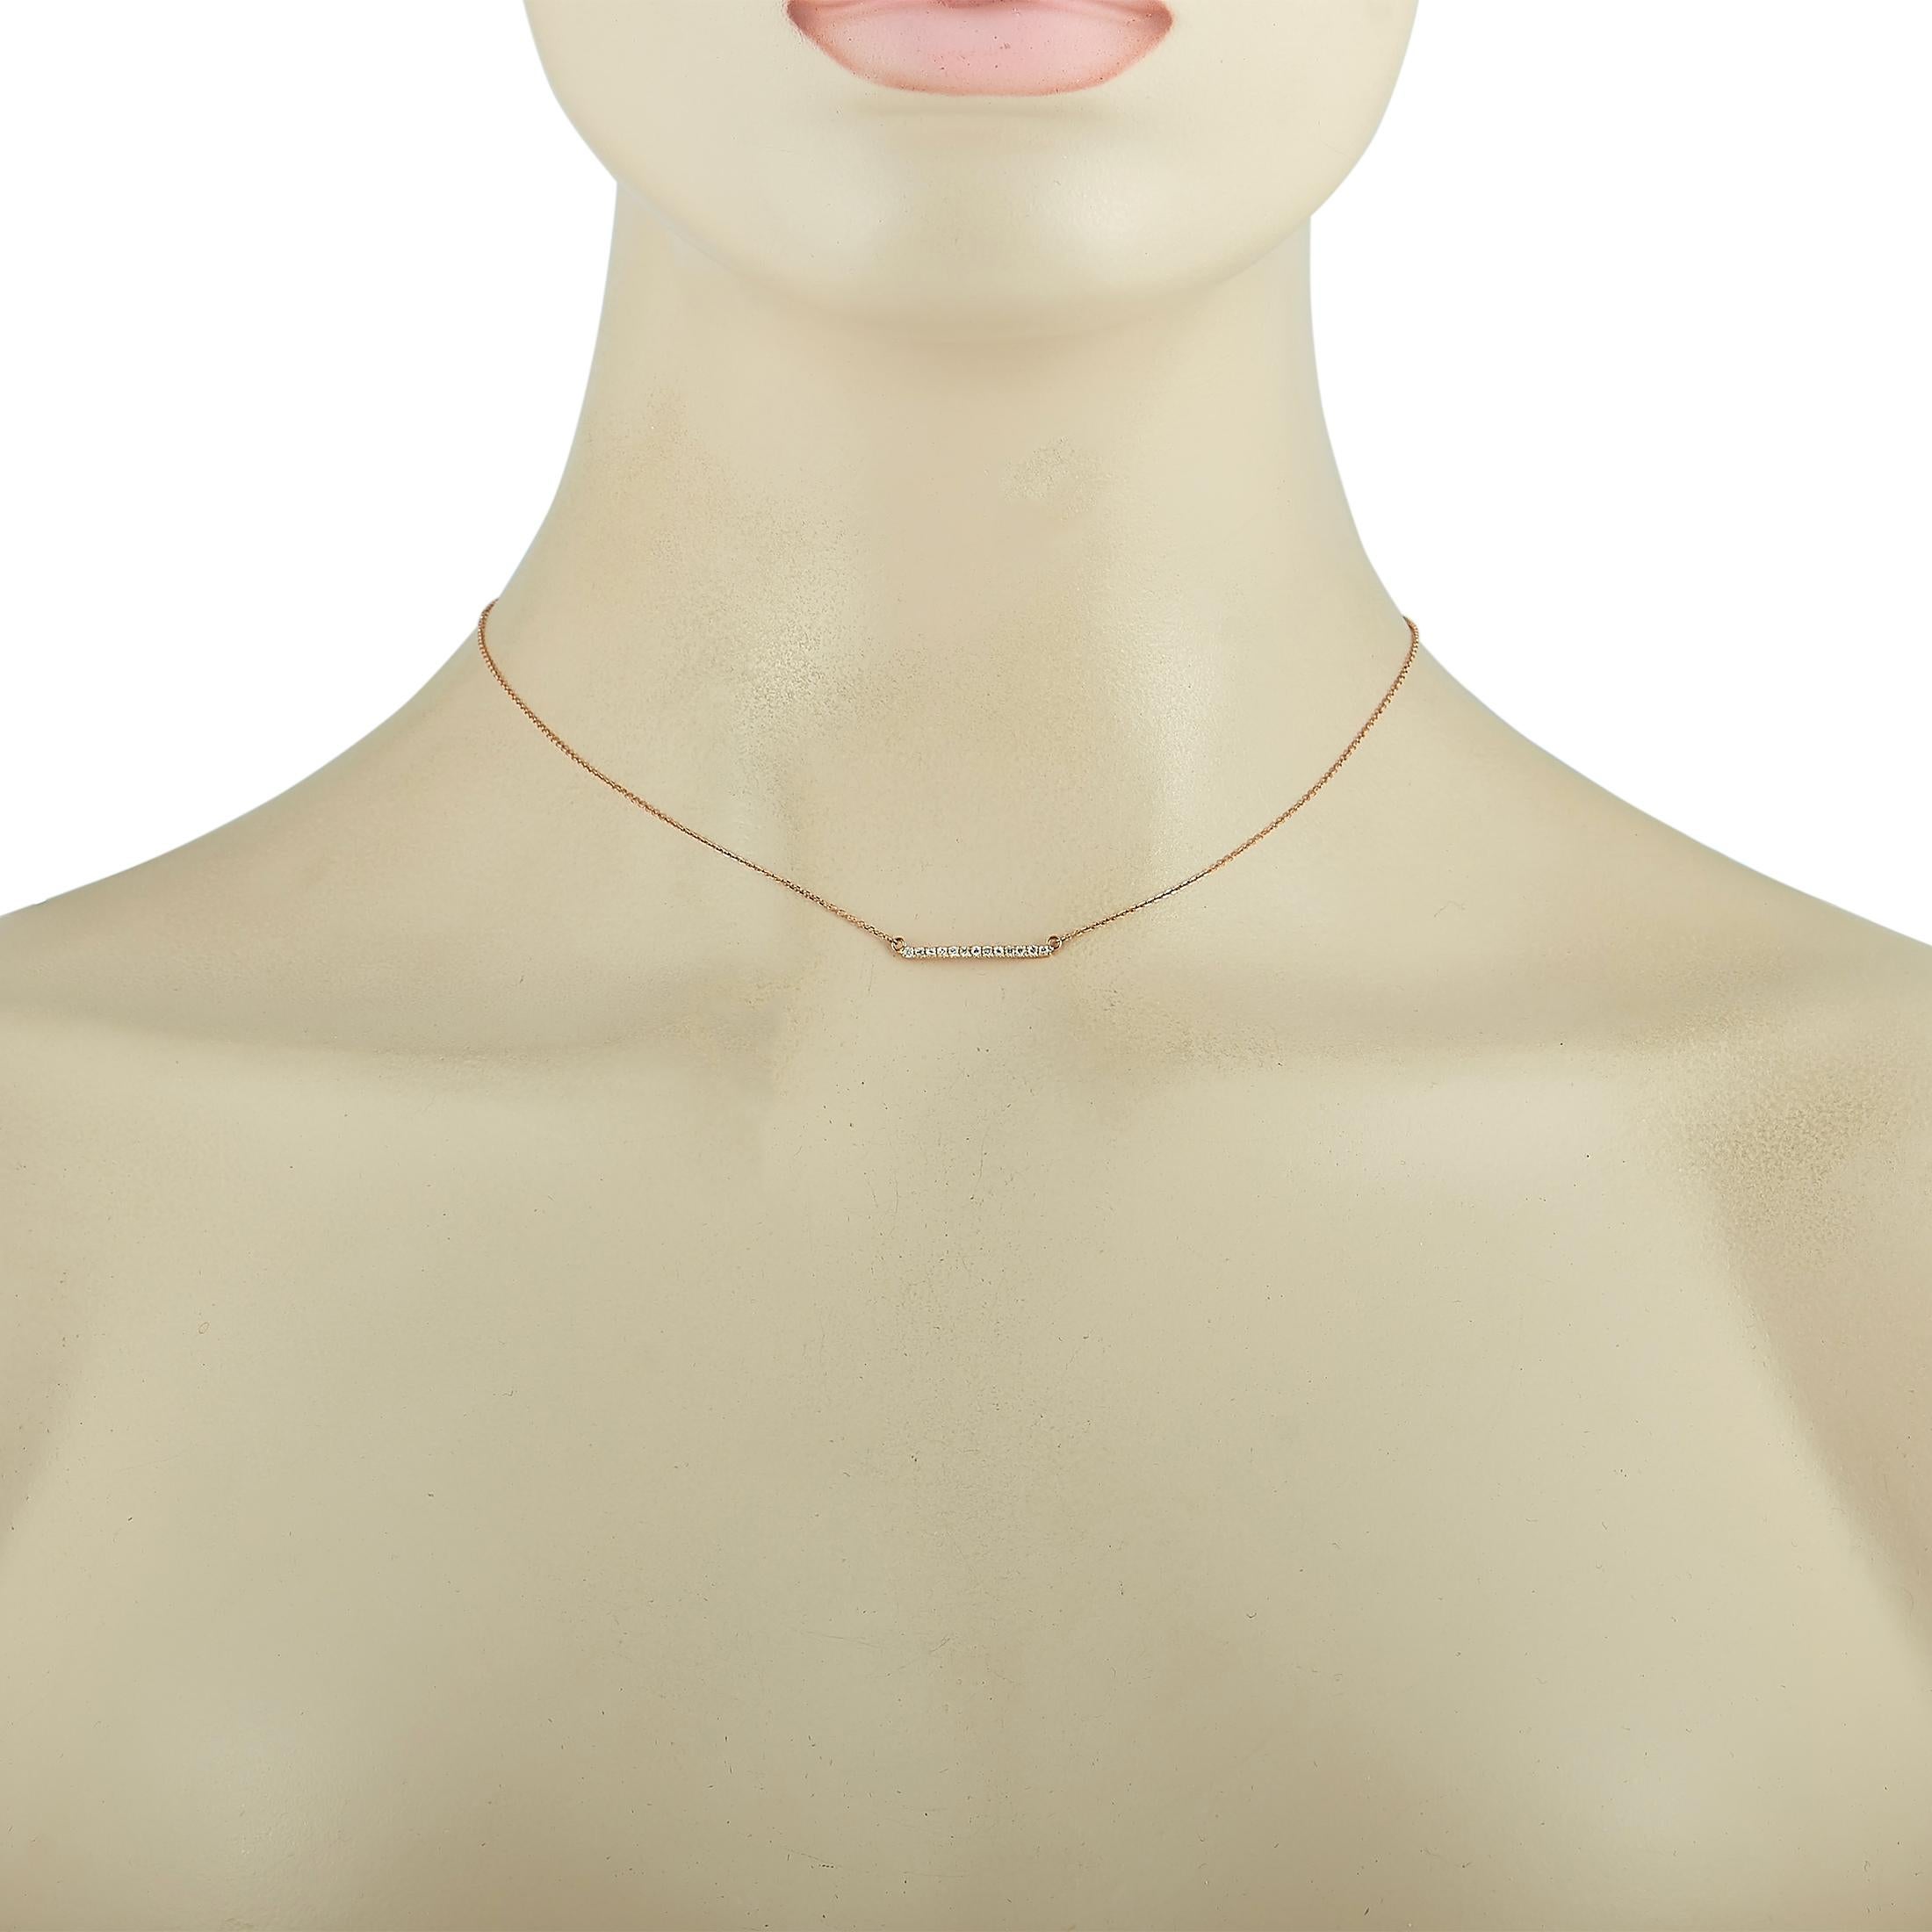 This LB Exclusive necklace is made of 18K rose gold and embellished with diamonds that amount to 0.13 carats. The necklace weighs 1.6 grams and boasts a 15” chain and a pendant that measures 0.06” in length and 0.80” in width.
 
 Offered in brand